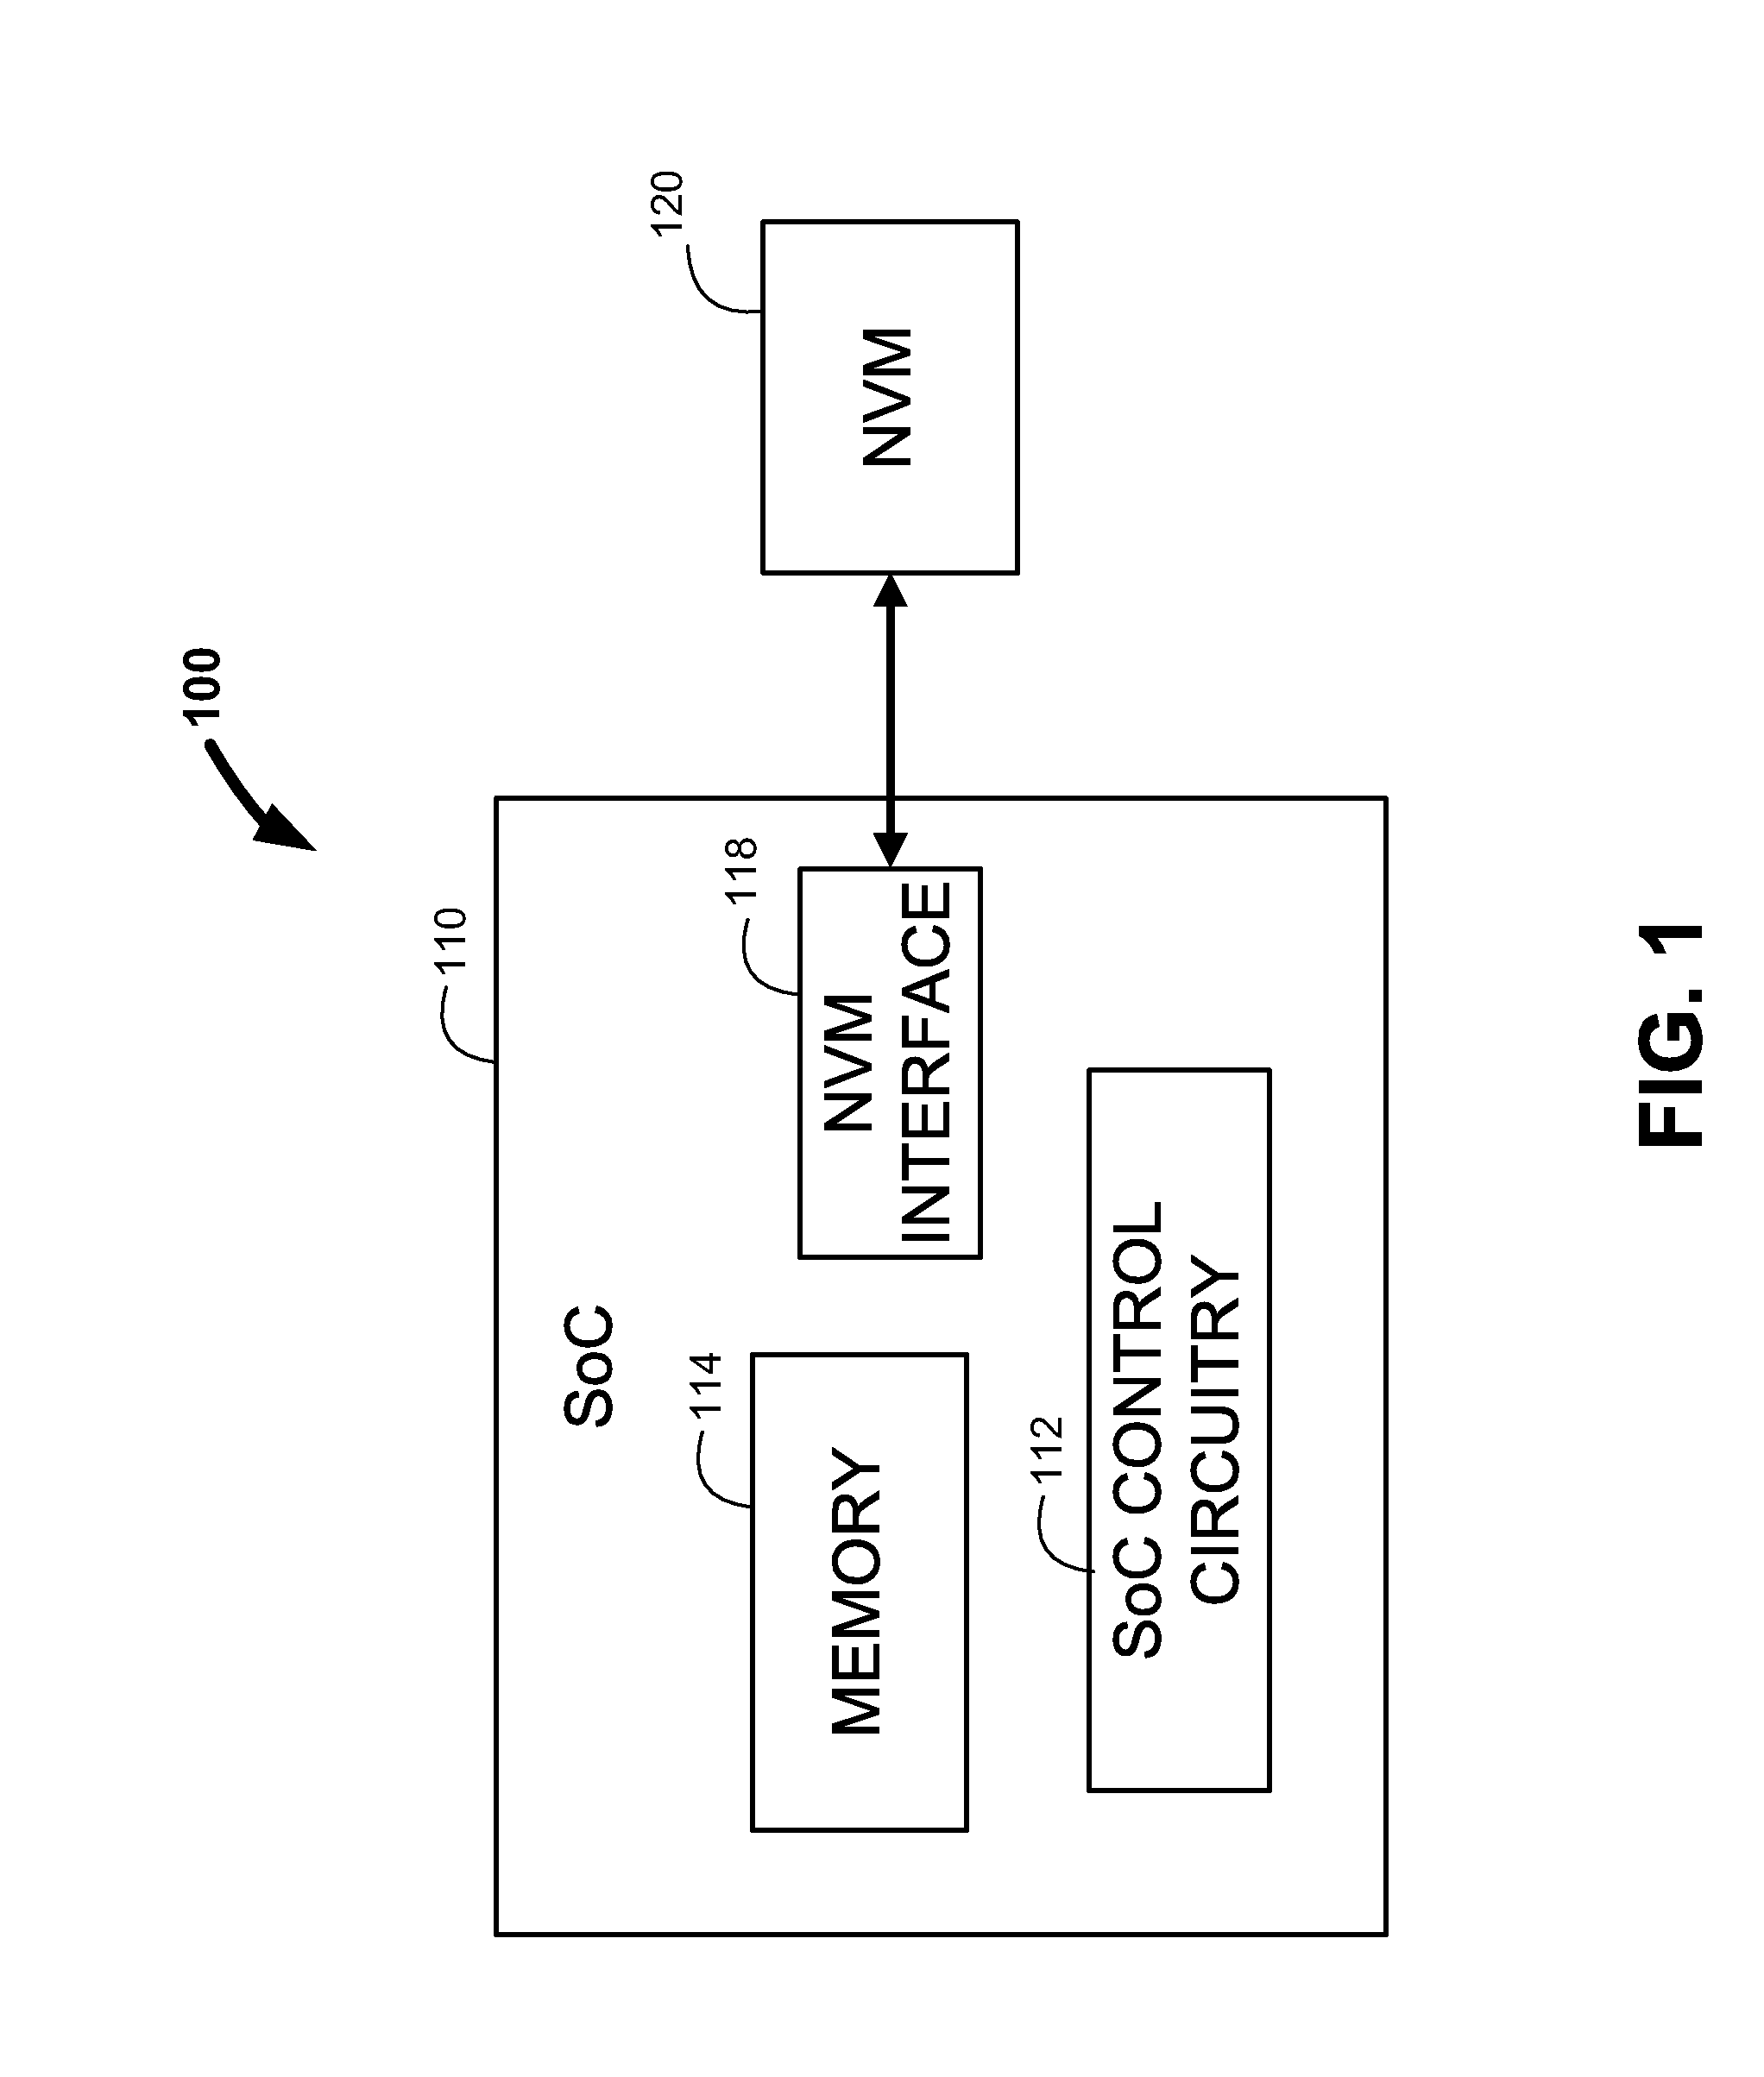 Initiating wear leveling for a non-volatile memory